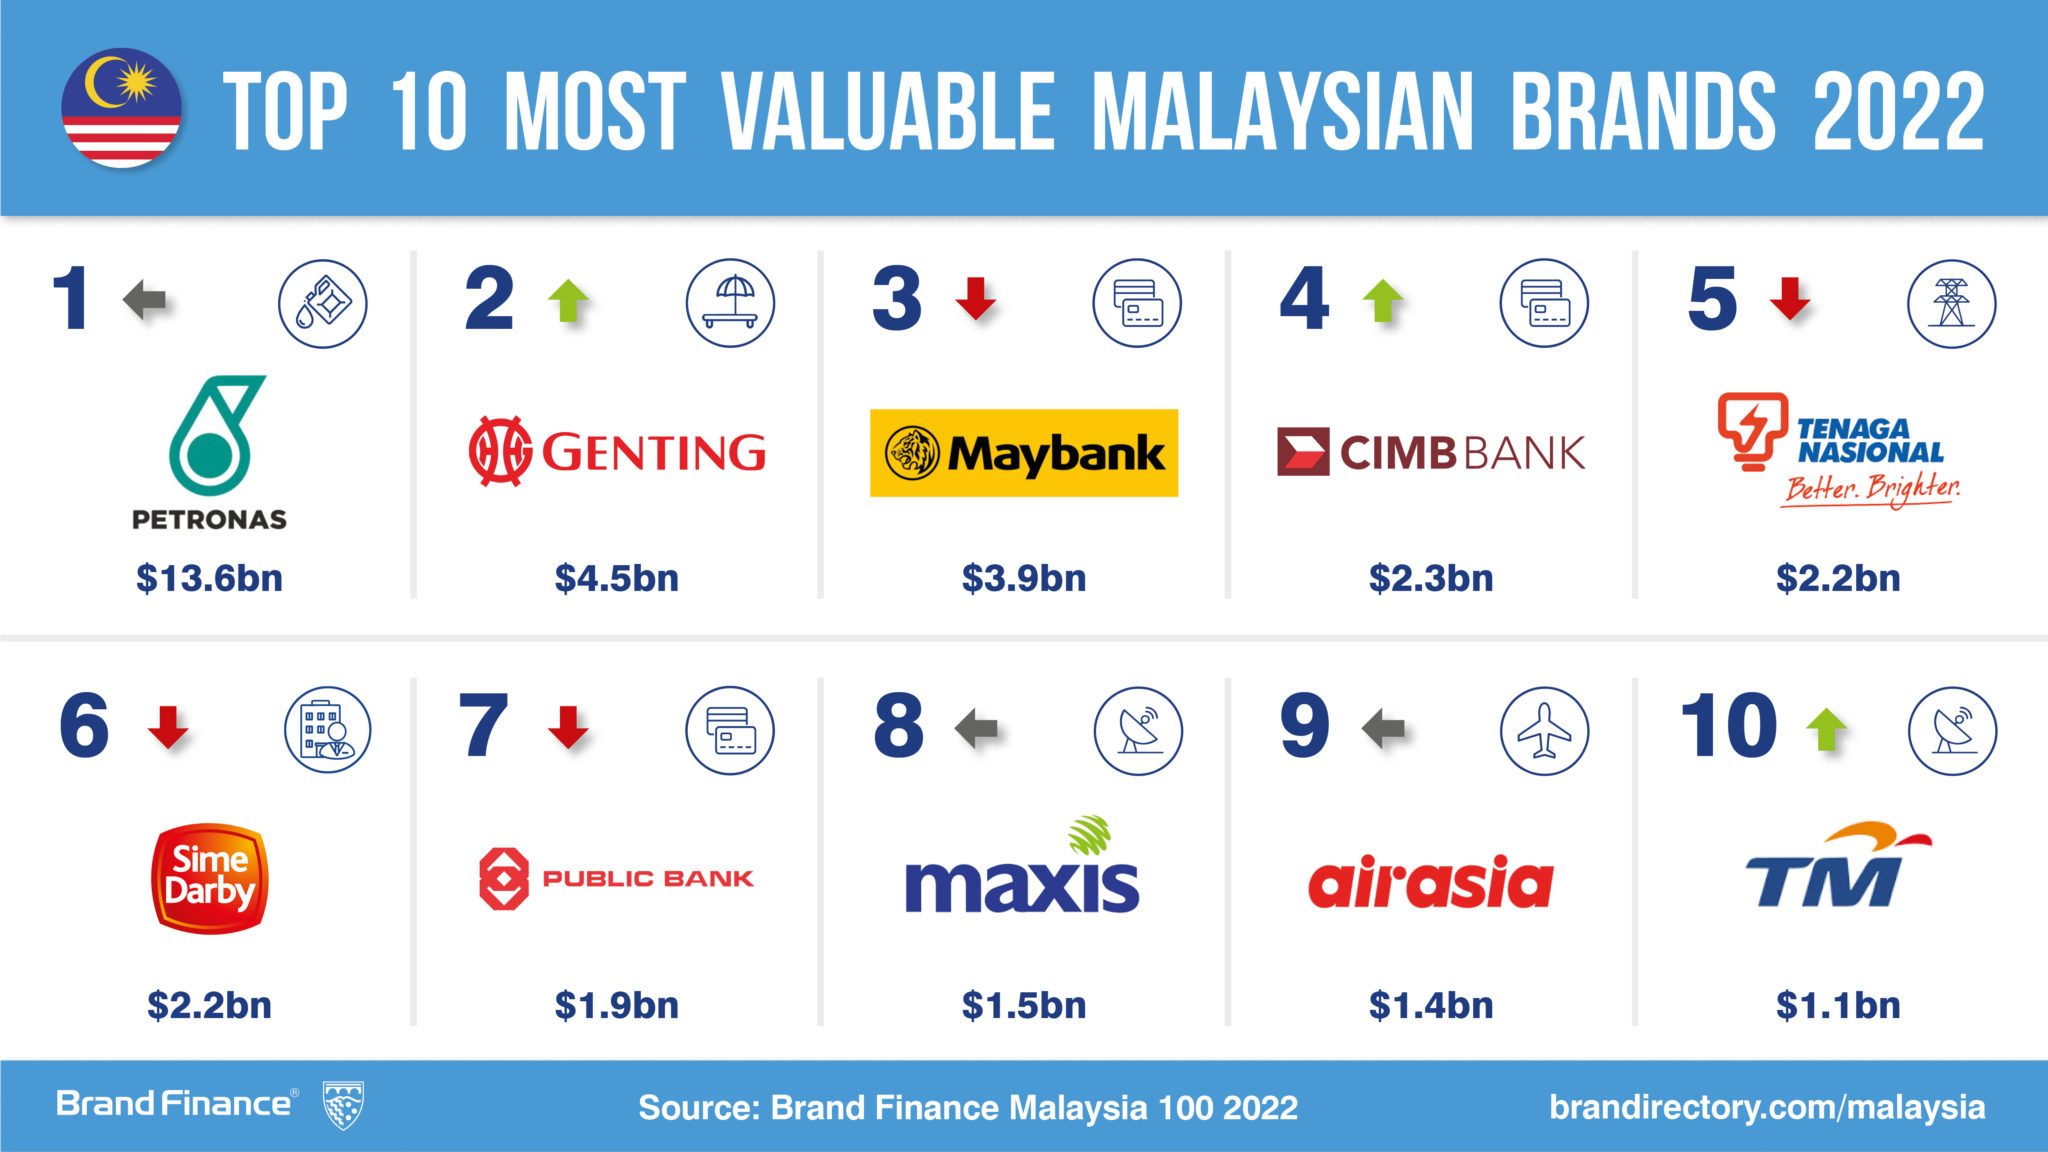 Malaysian Brands Return To Growth After Covid As Petronas Remains On